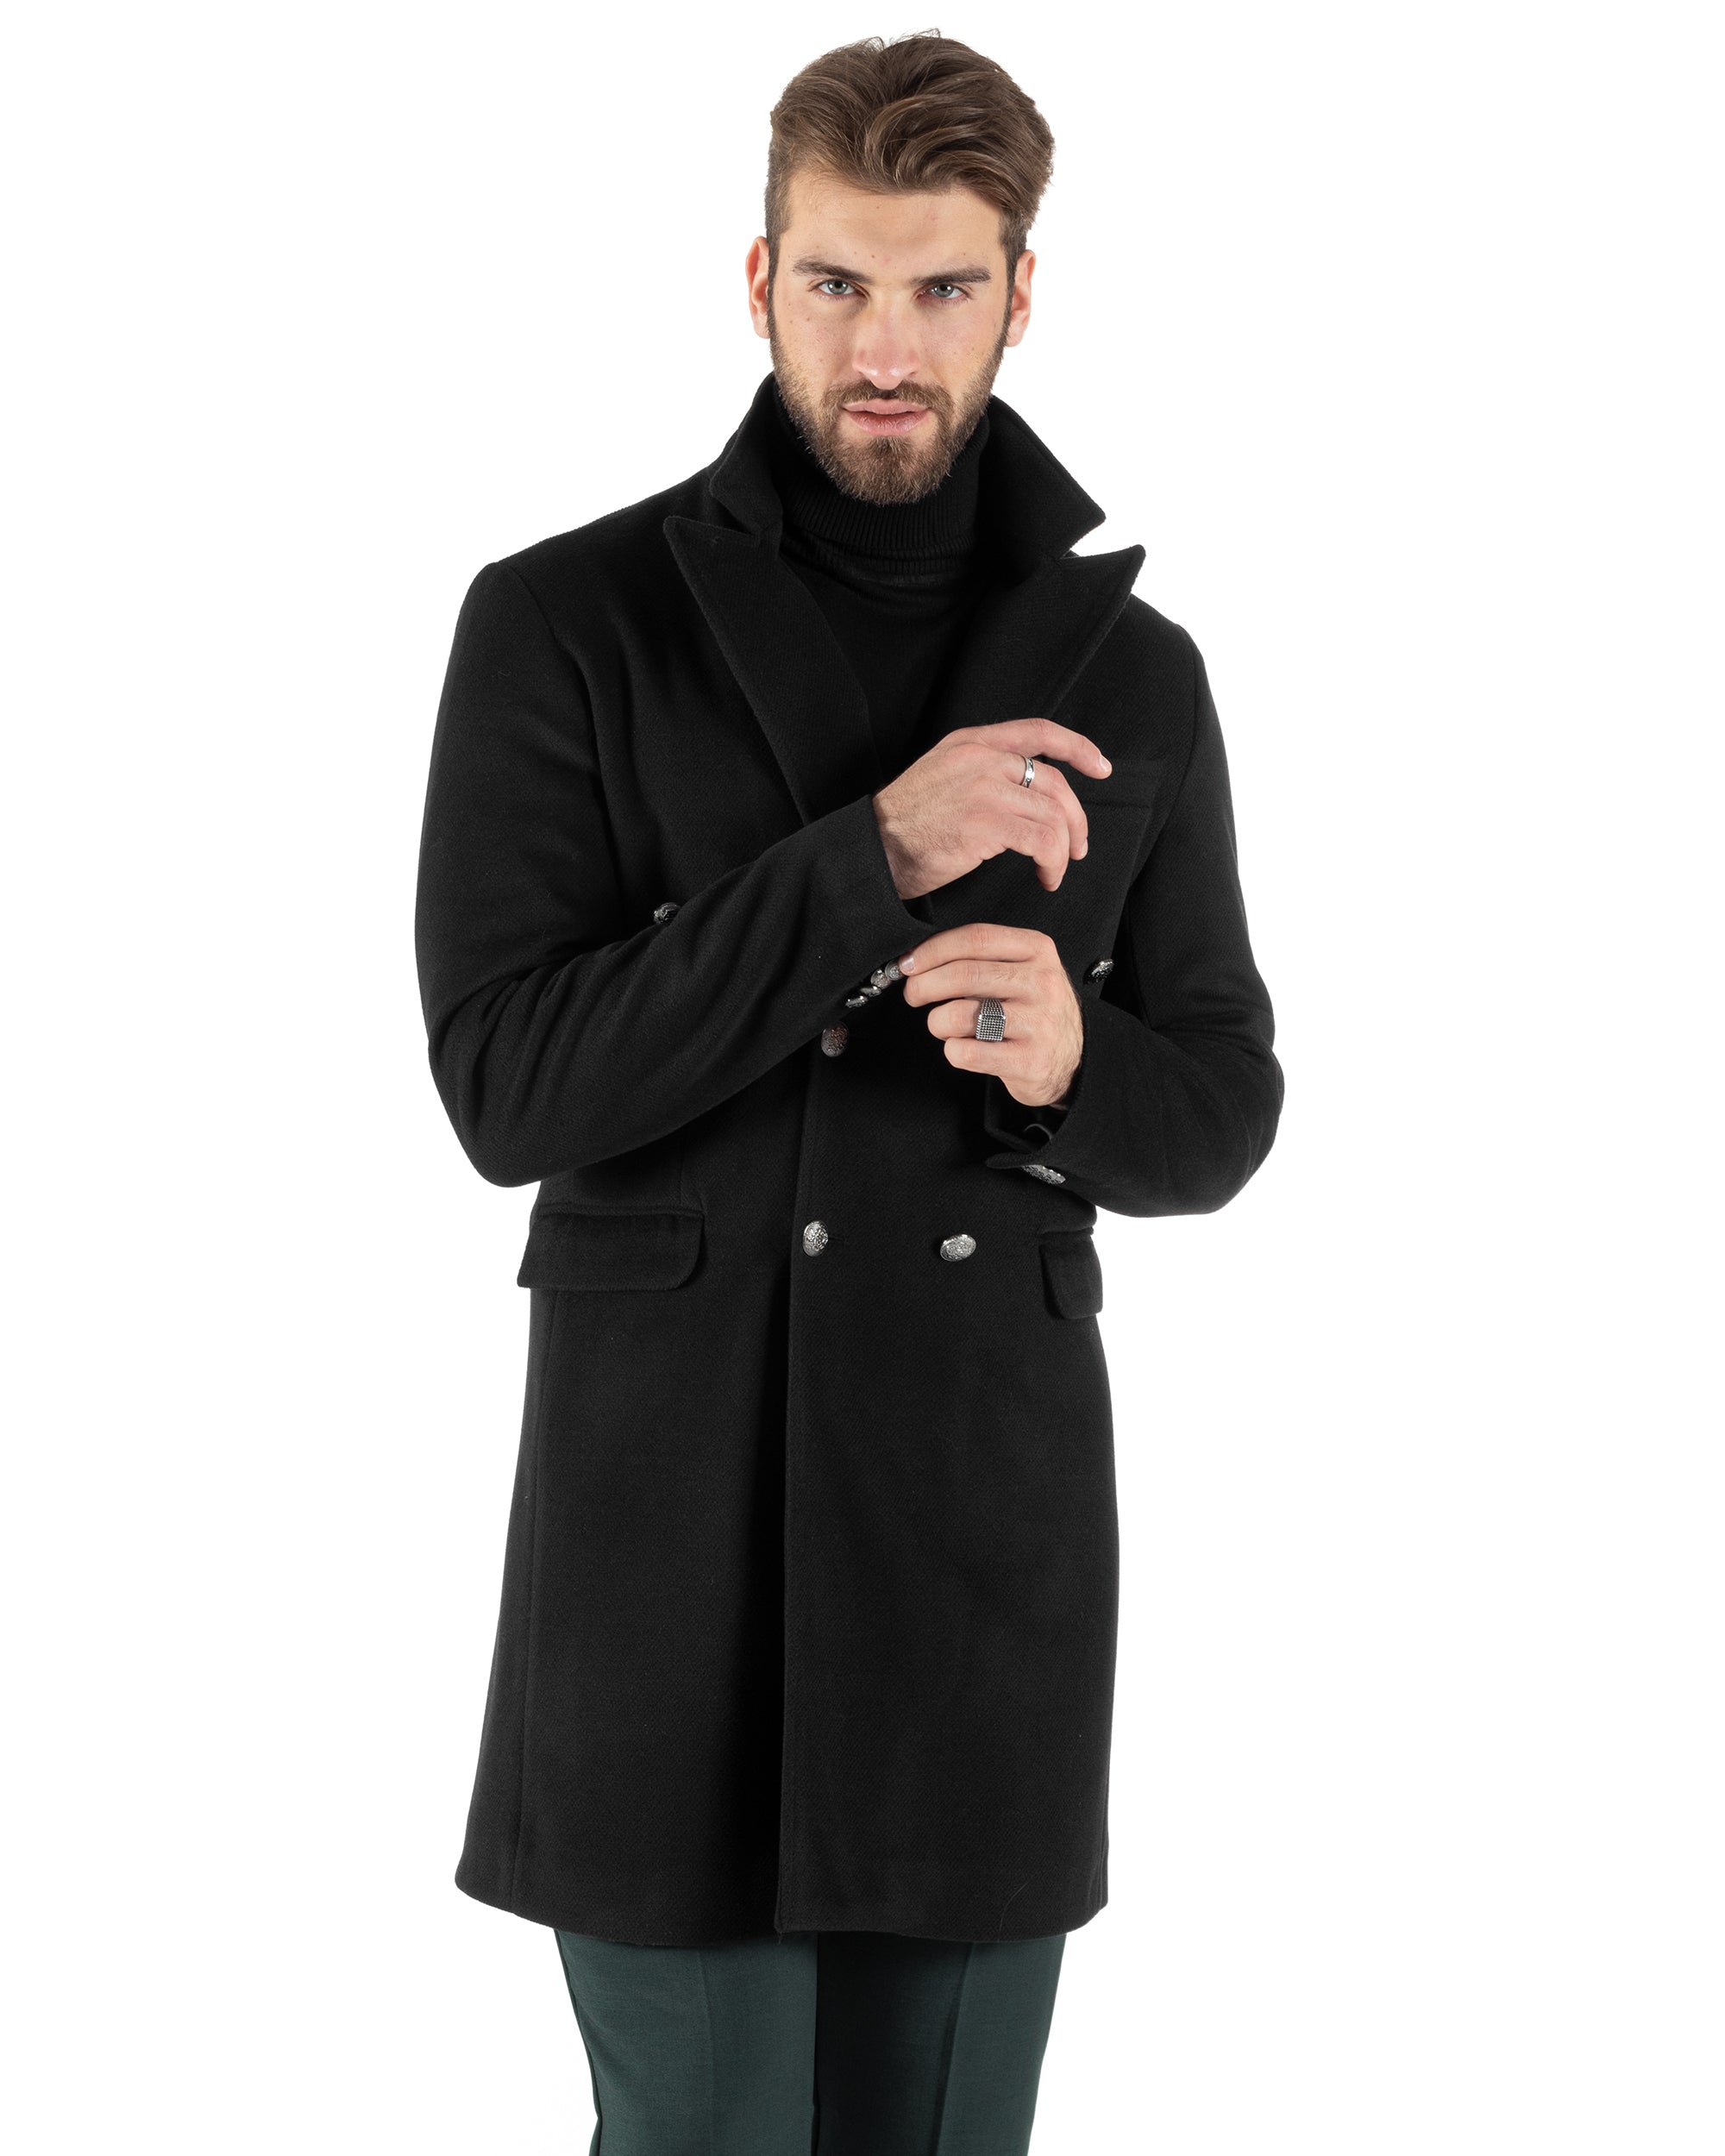 Double-breasted Coat Men's Jacket With Elegant Black Collar GIOSAL-G2756A